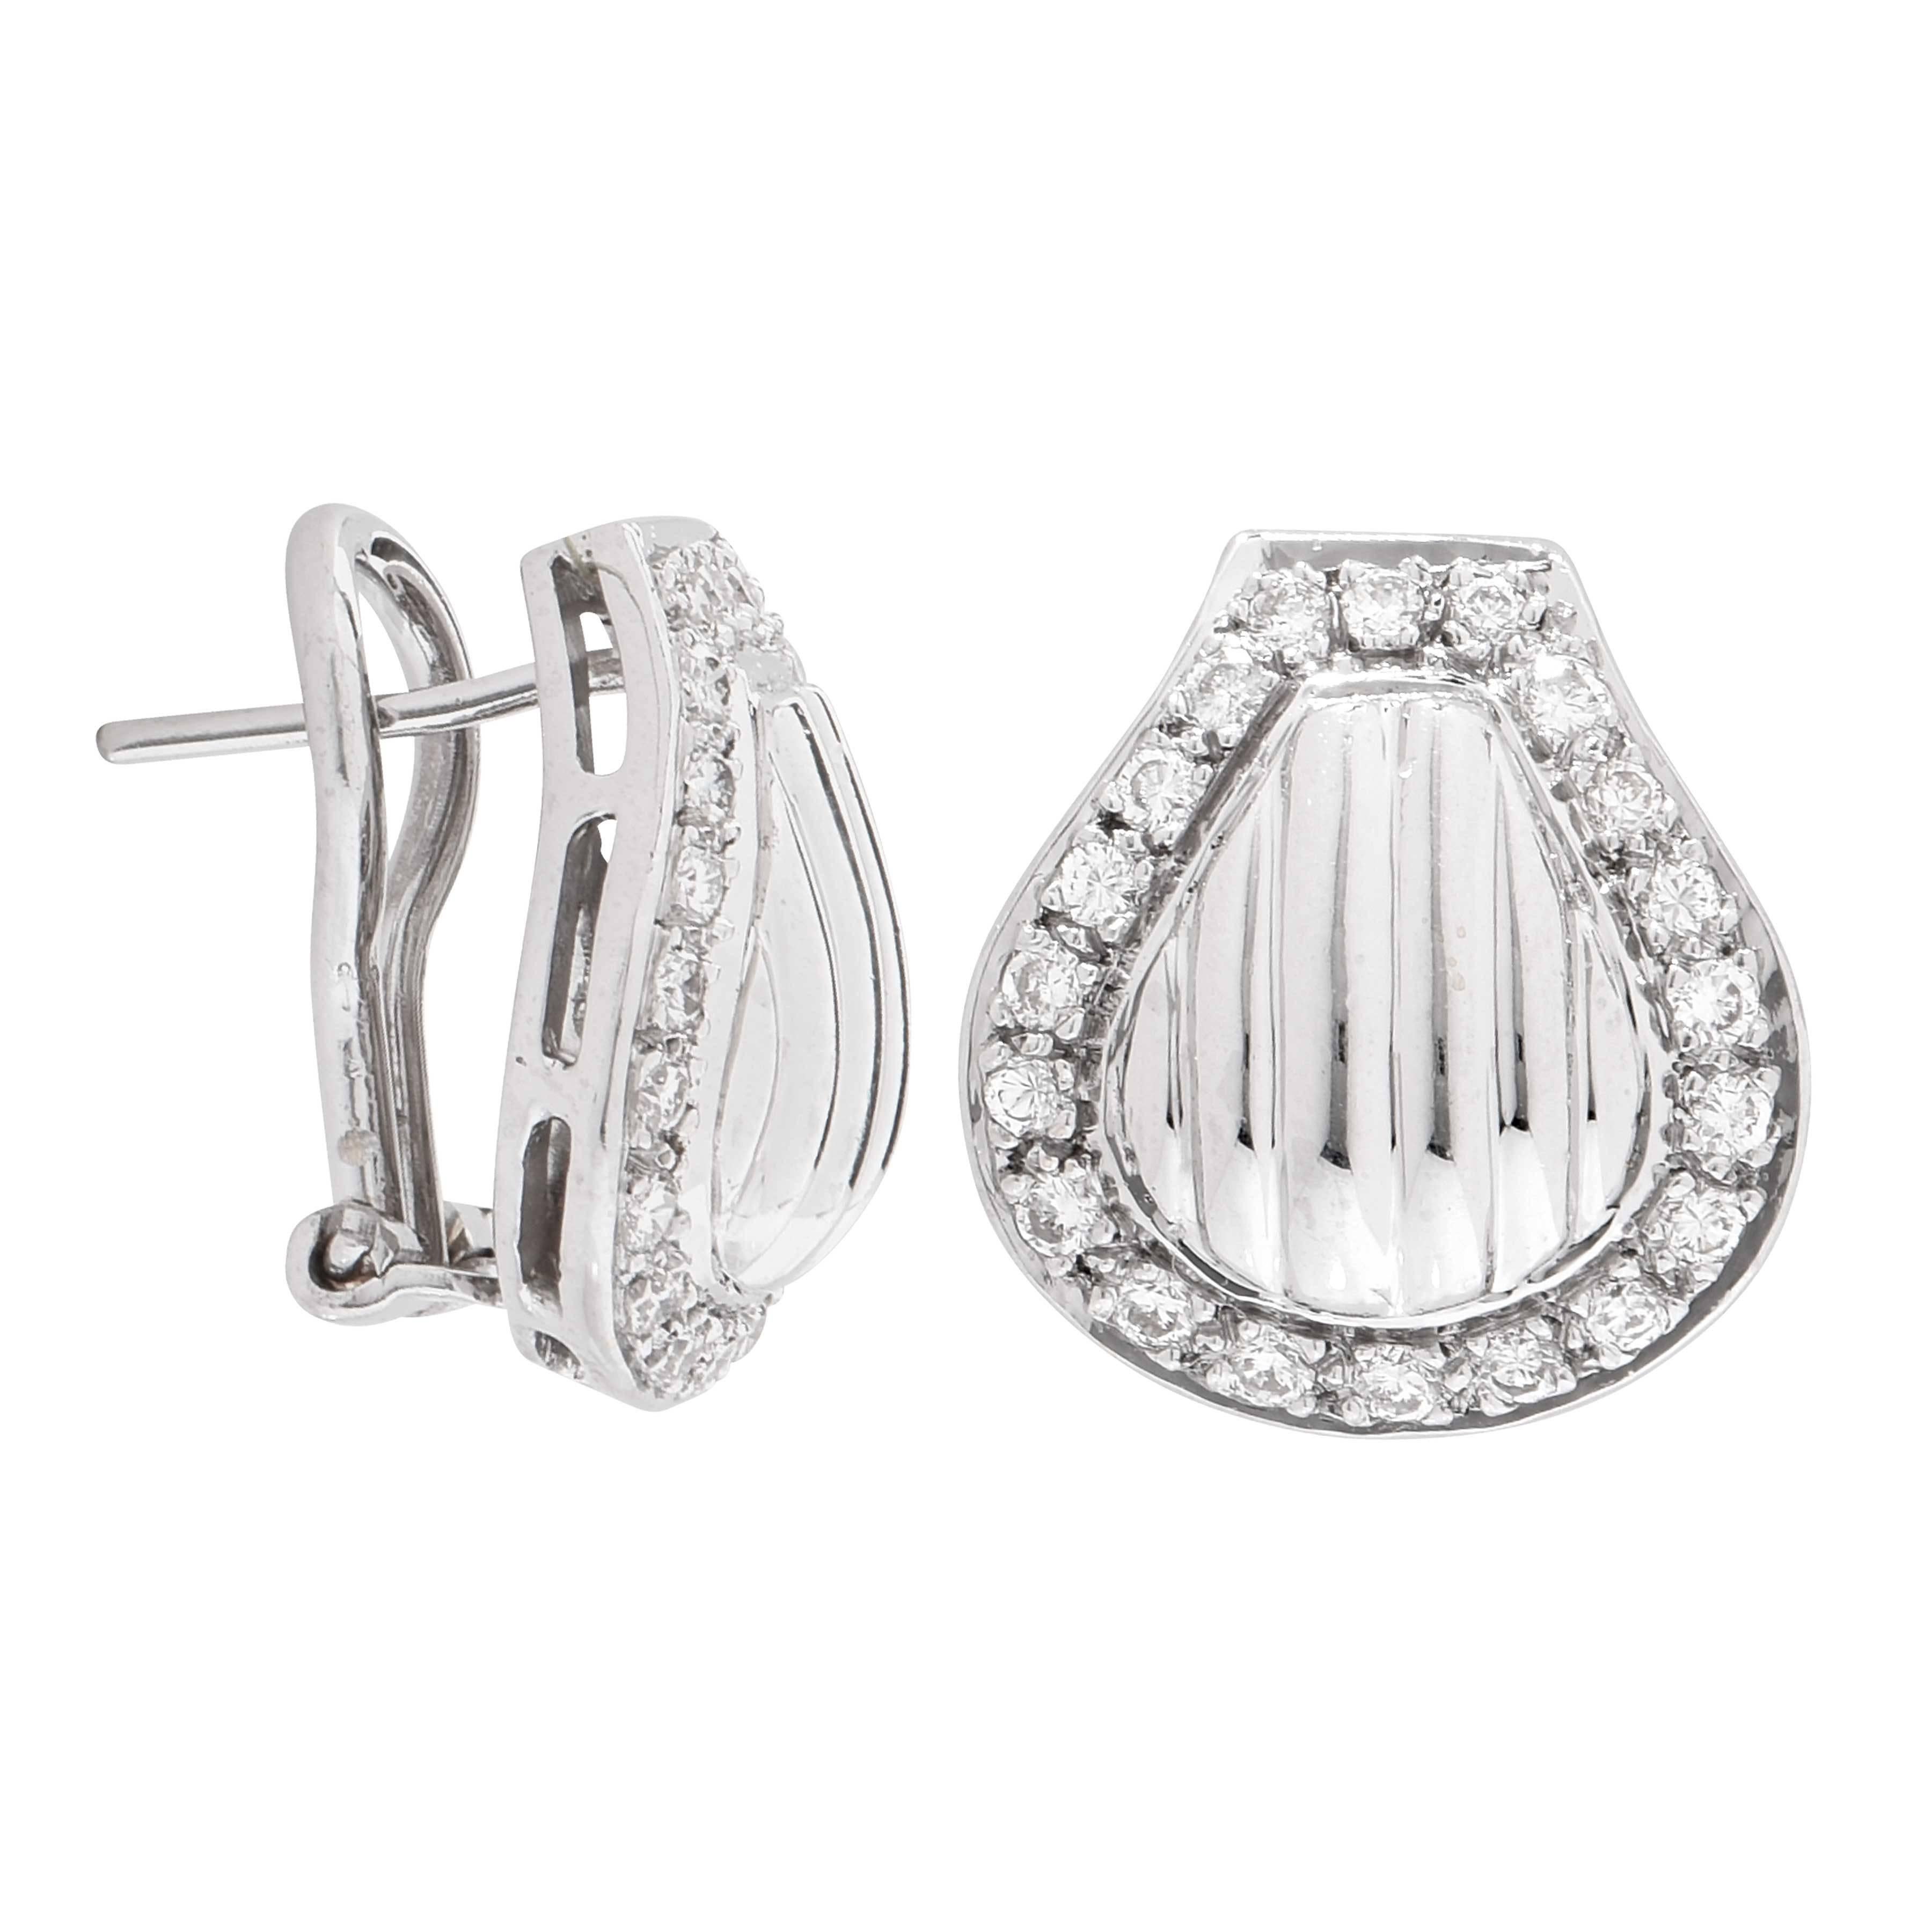 These whimsical clam shell design earrings feature 40 bead set round cut diamonds with an estimated total weight of .80 carars. 

Metal Type: 18 Karat White Gold (tested and/or stamped)
Metal Weight: 8.7 Grams
